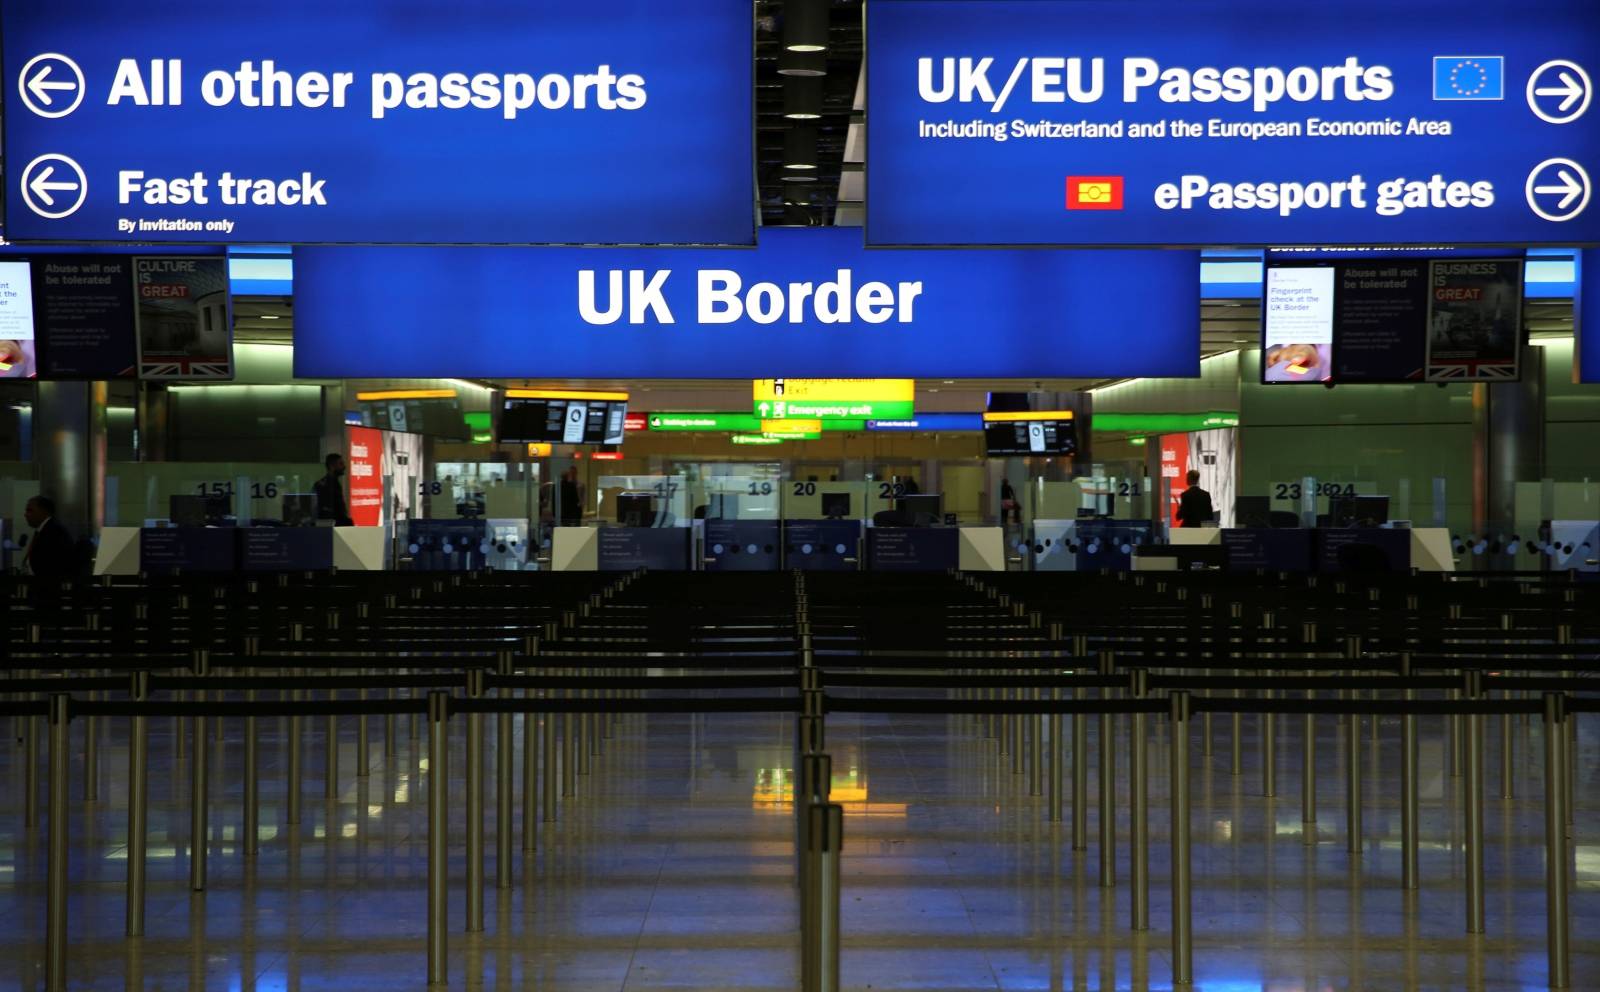 FILE PHOTO: UK Border control is seen in Terminal 2 at Heathrow Airport in London